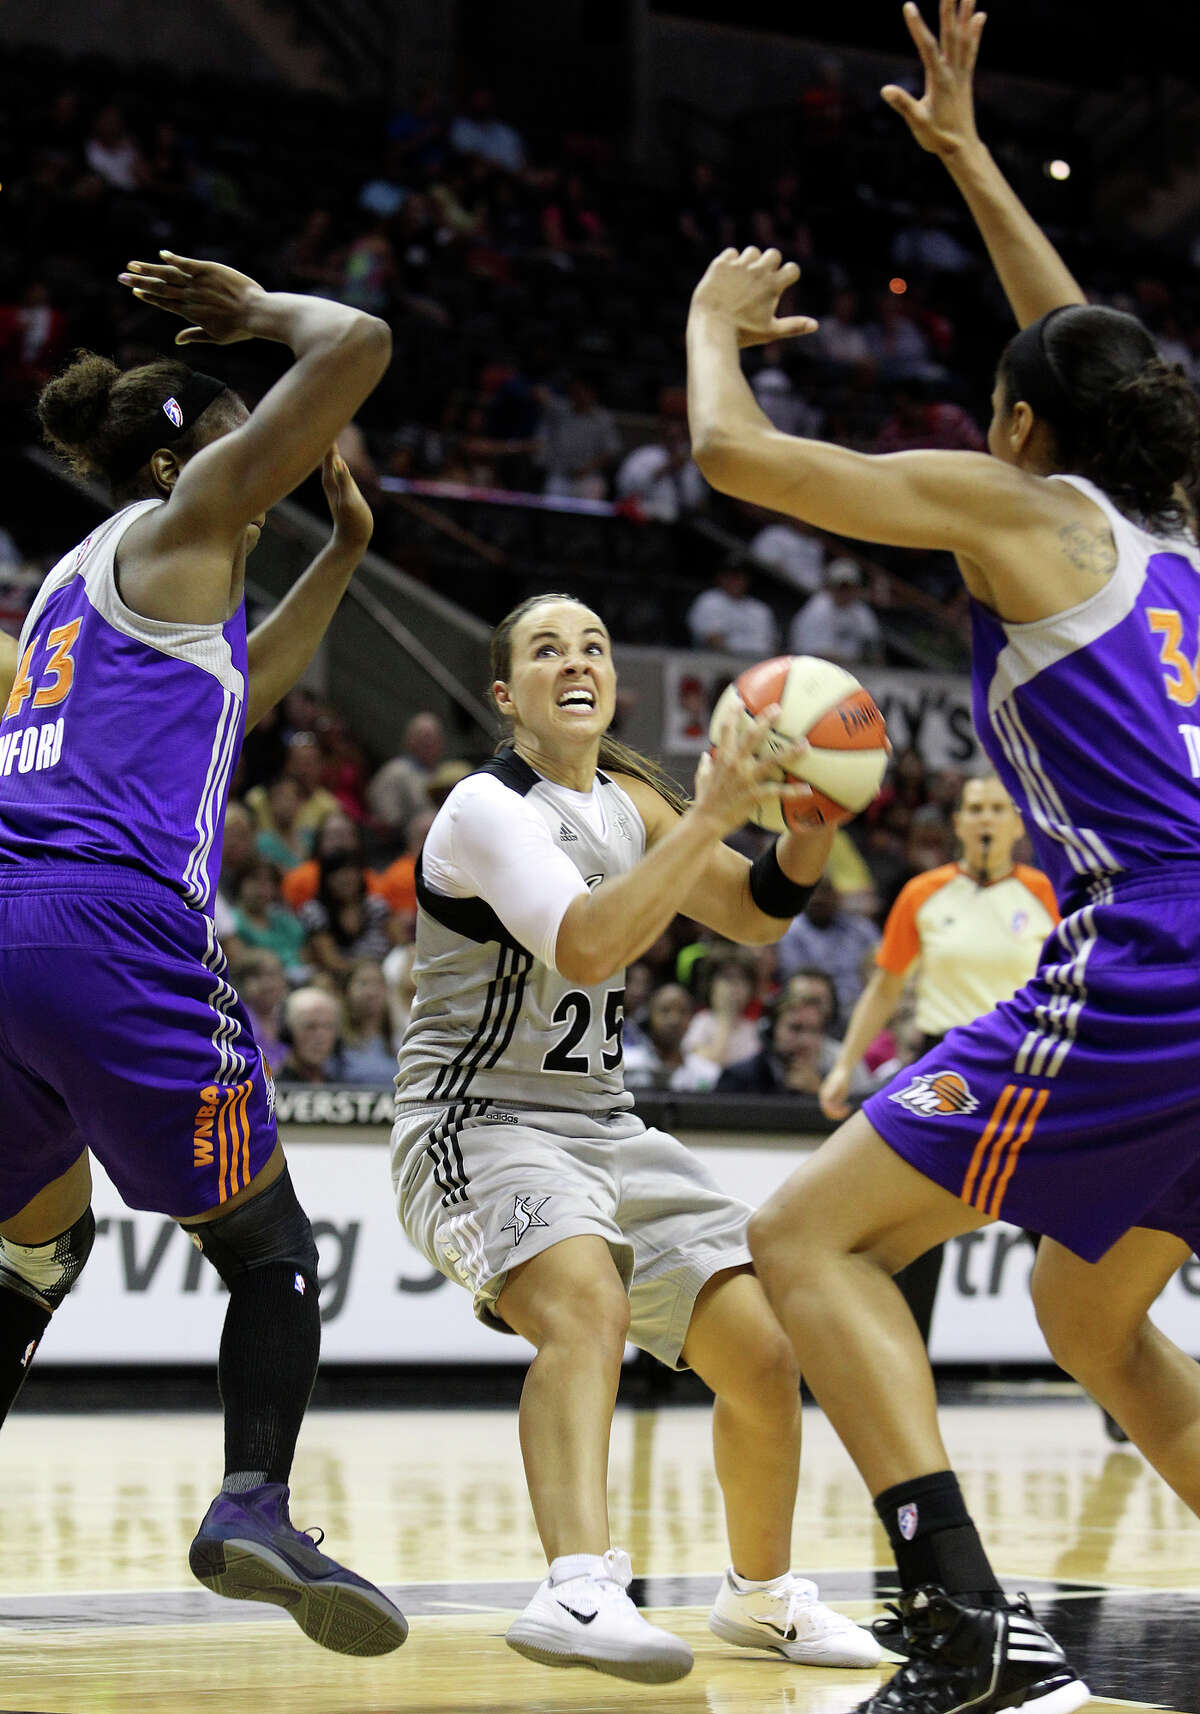 Becky Hammon challenges the lane as the Silver Stars host the Phoenix Mercury at the AT&T Center on July 3, 2012.